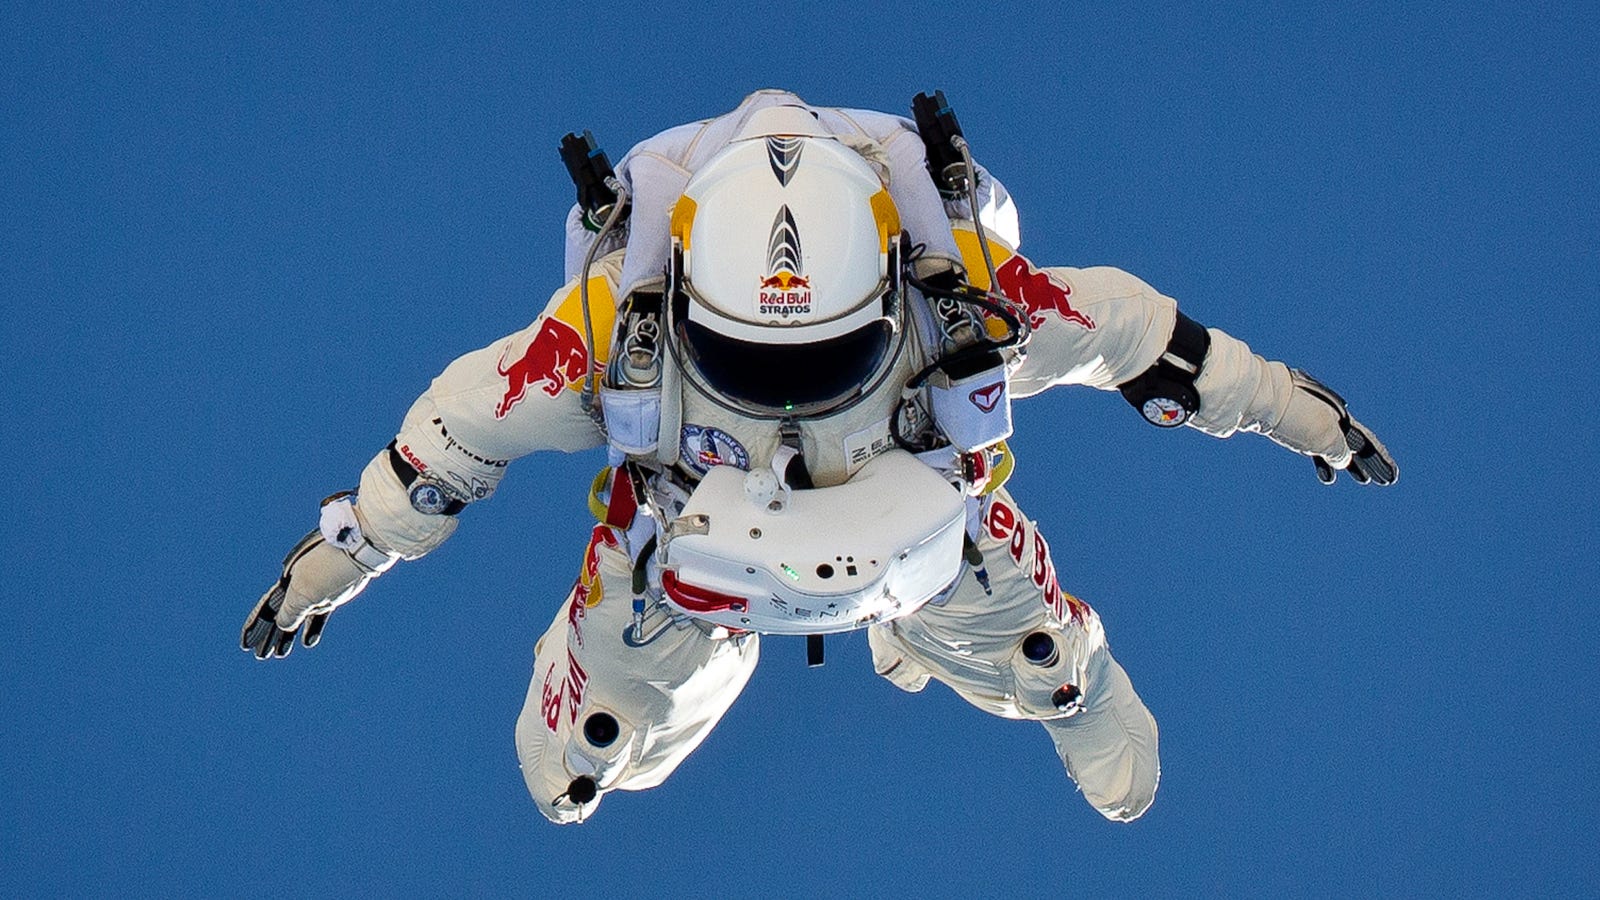 Everything You Need To Know About Red Bull's Insane World Record 23